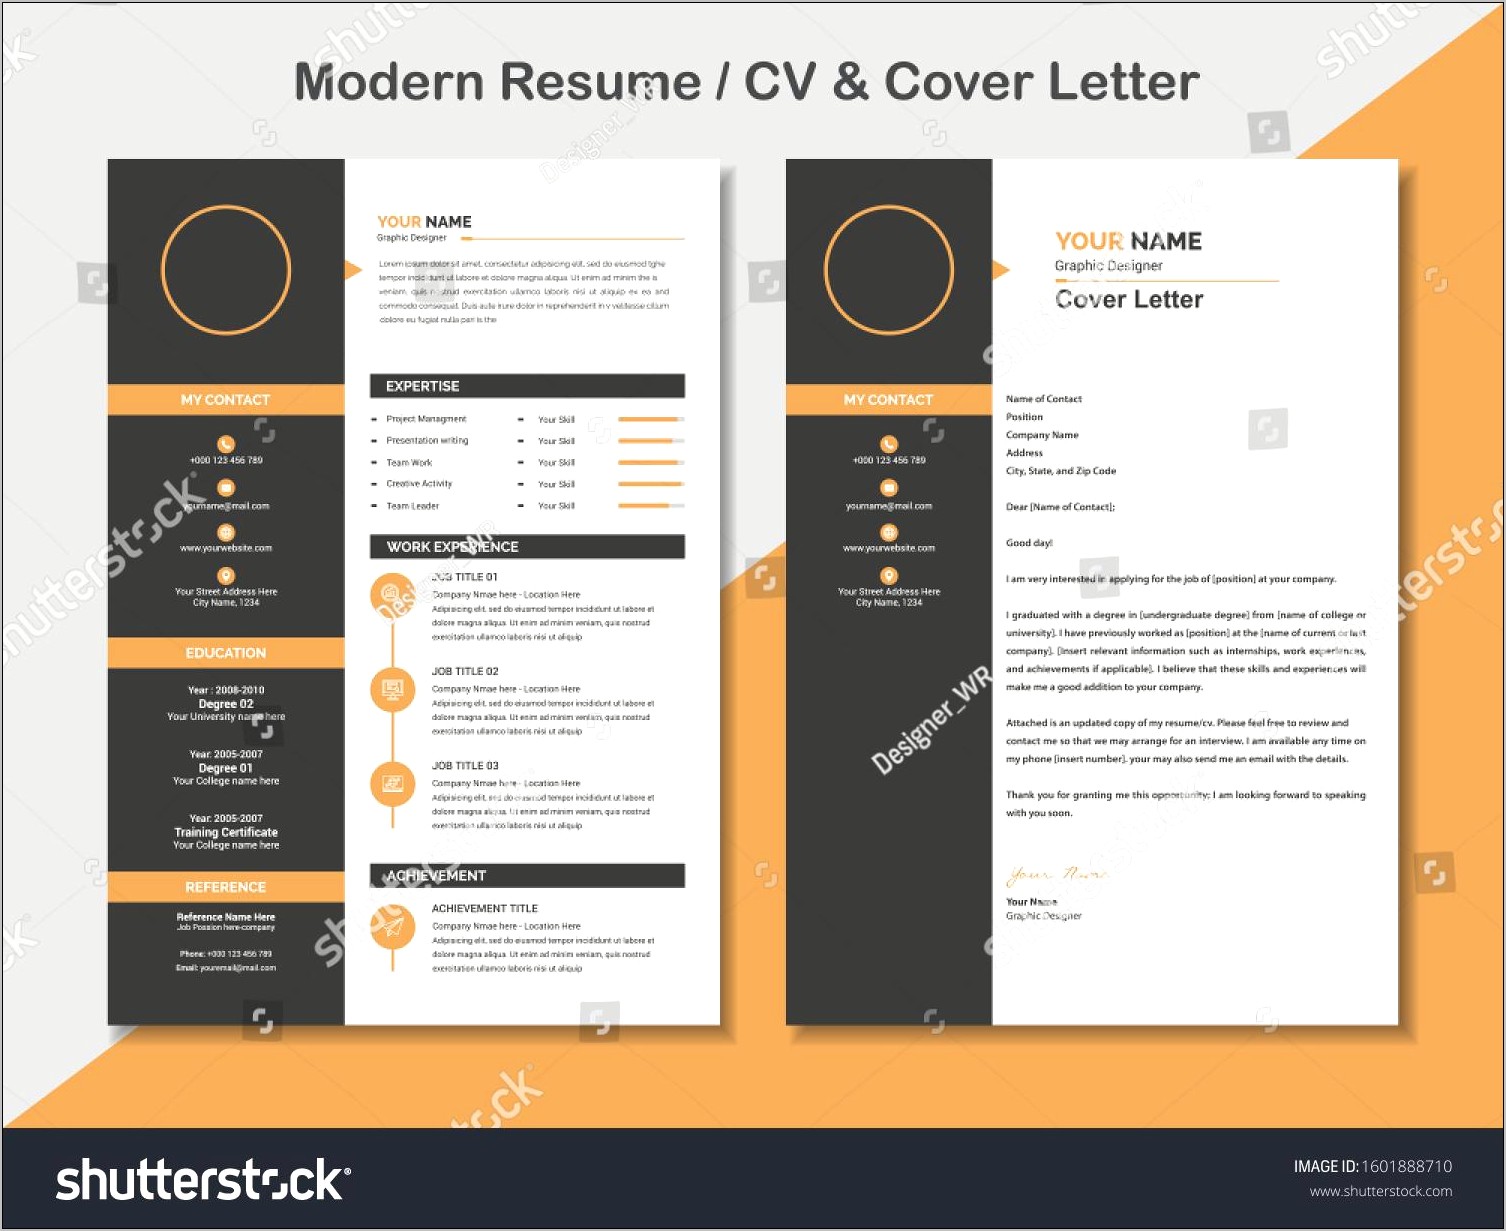 Send Email Resume And Cover Letter